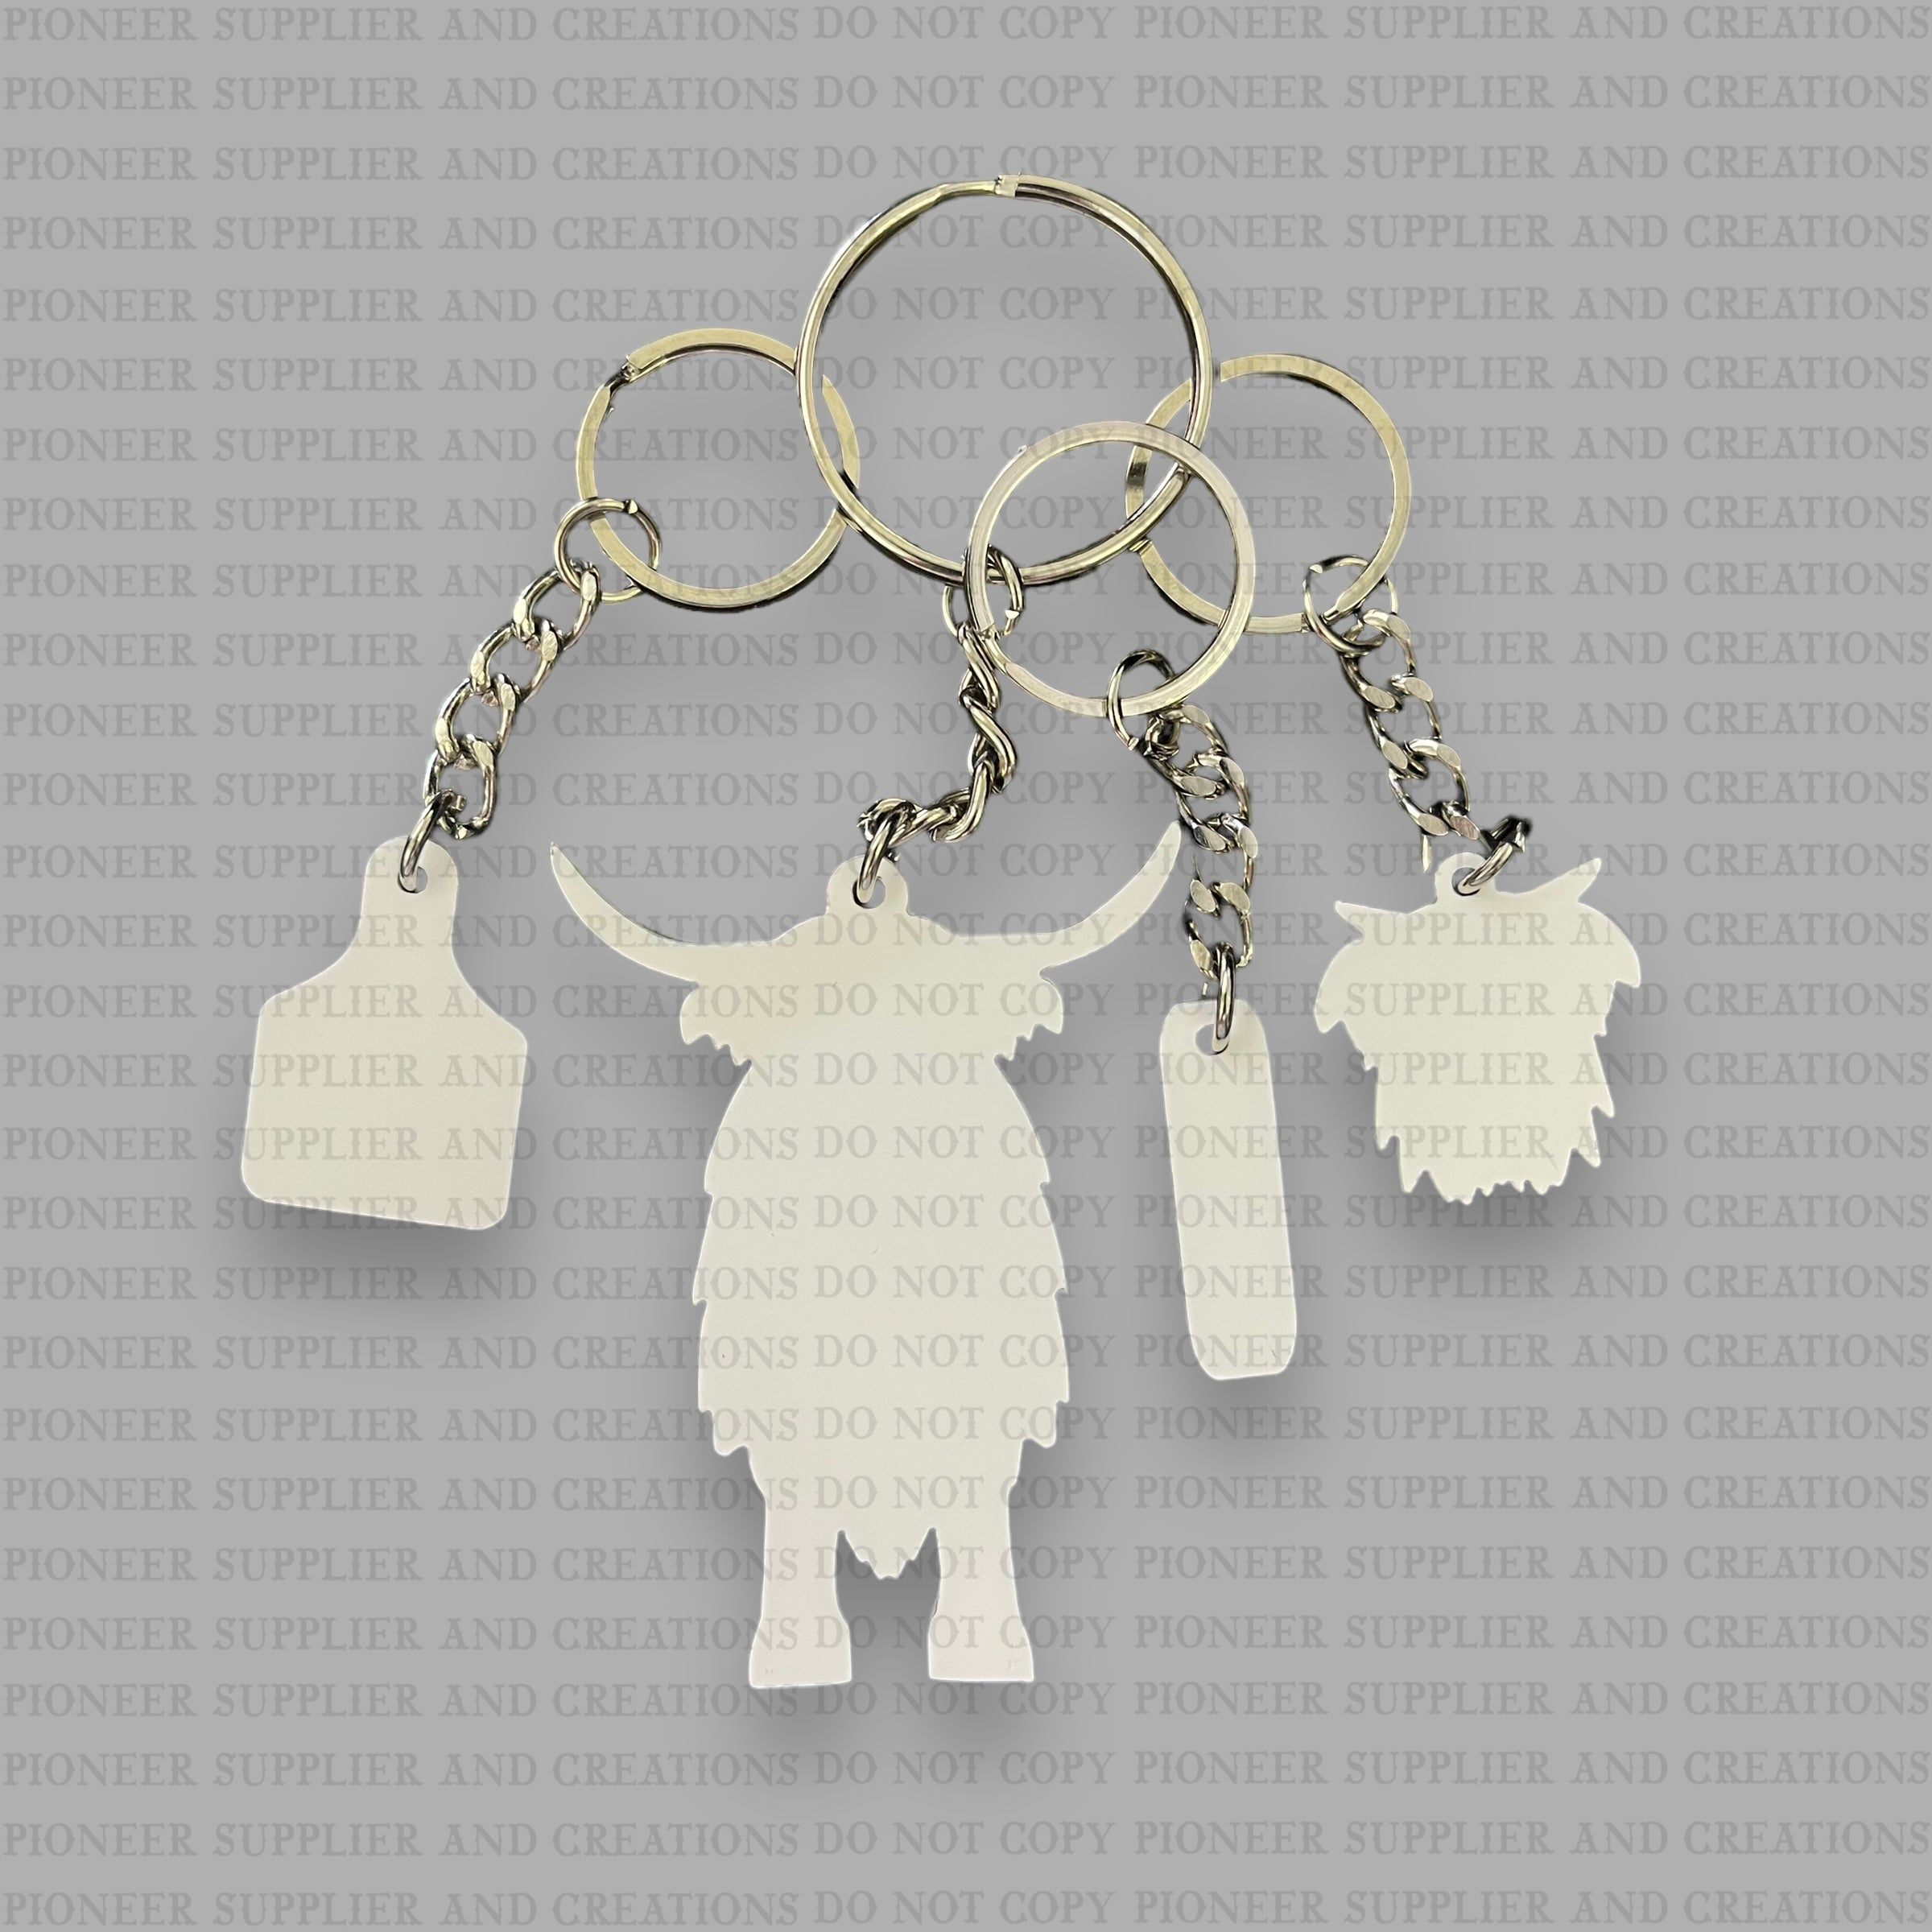 Gems & Timber White Acrylic Double Sided Sublimation Blanks for Keychains in Cow Tag Shape